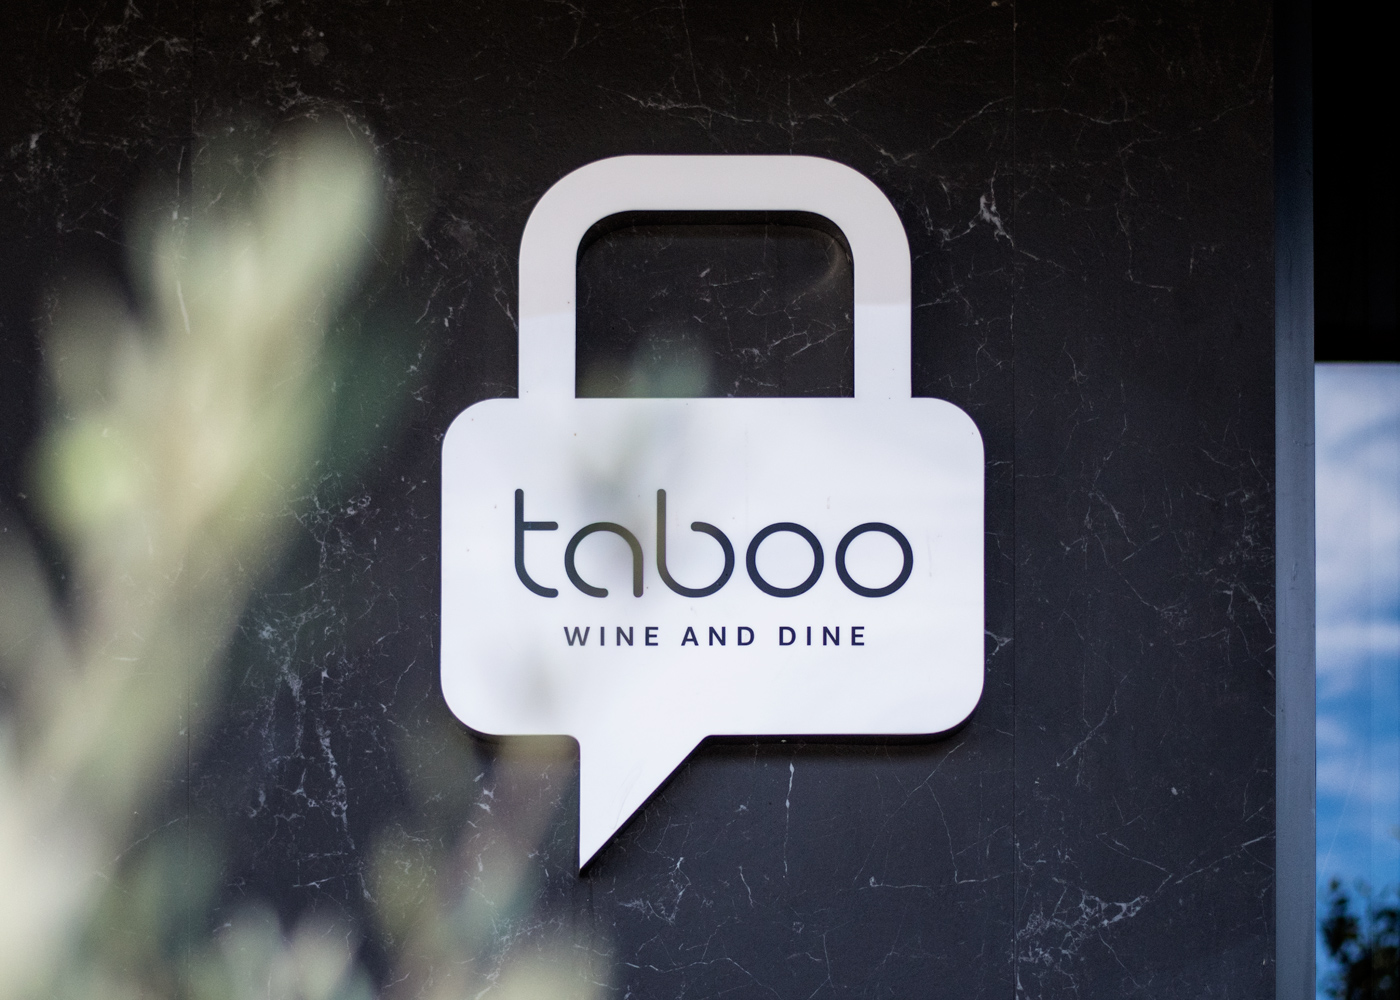 The Verbal and Visual Identity of Wine & Dine Restaurant